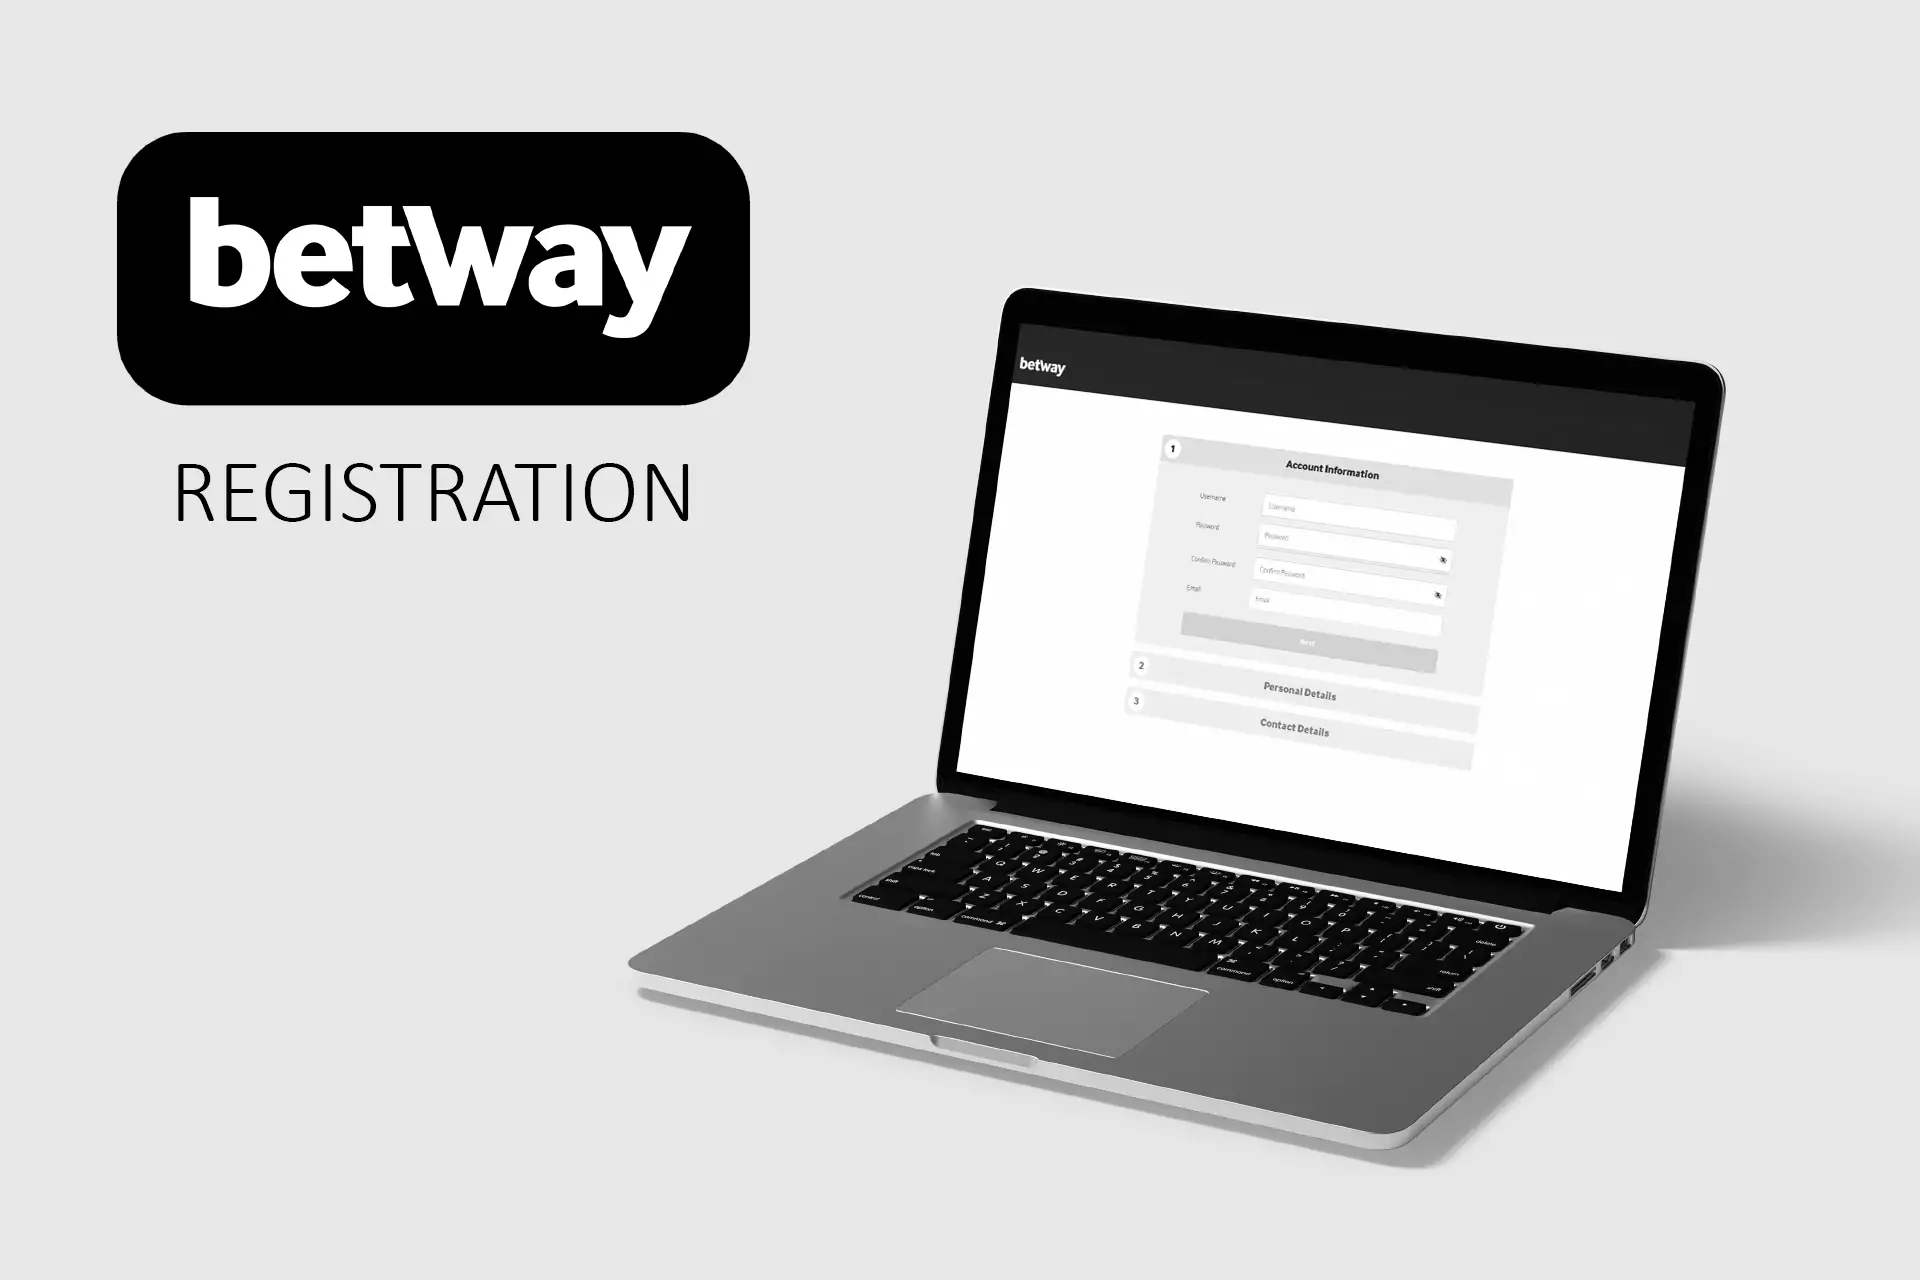 Follow our step-by-step instructions for registering at Betway.